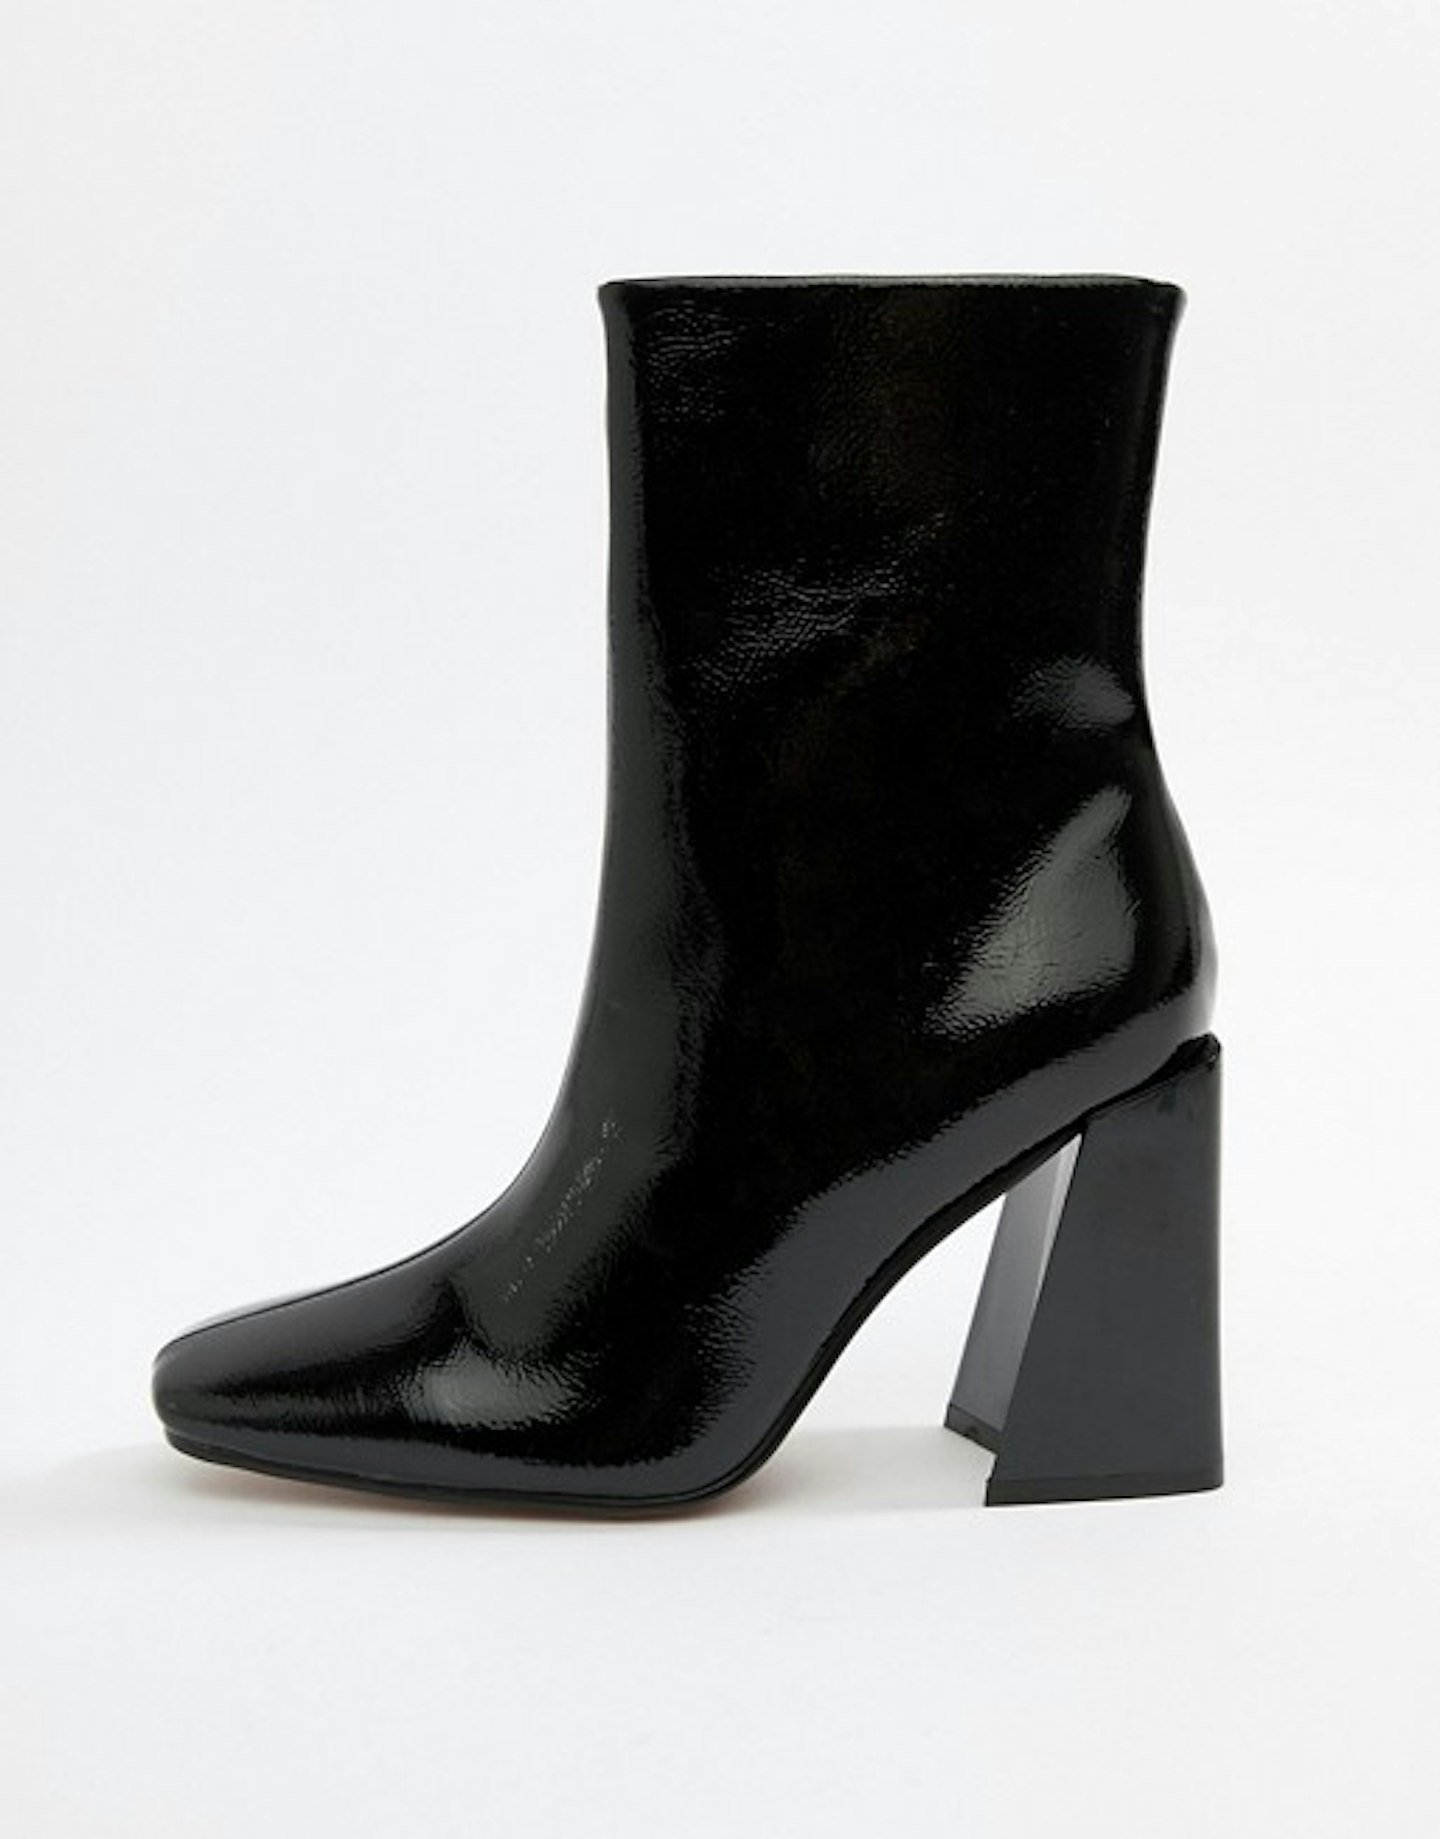 Missguided, Square toe New Flare Heeled Ankle Boot, £40, ASOS